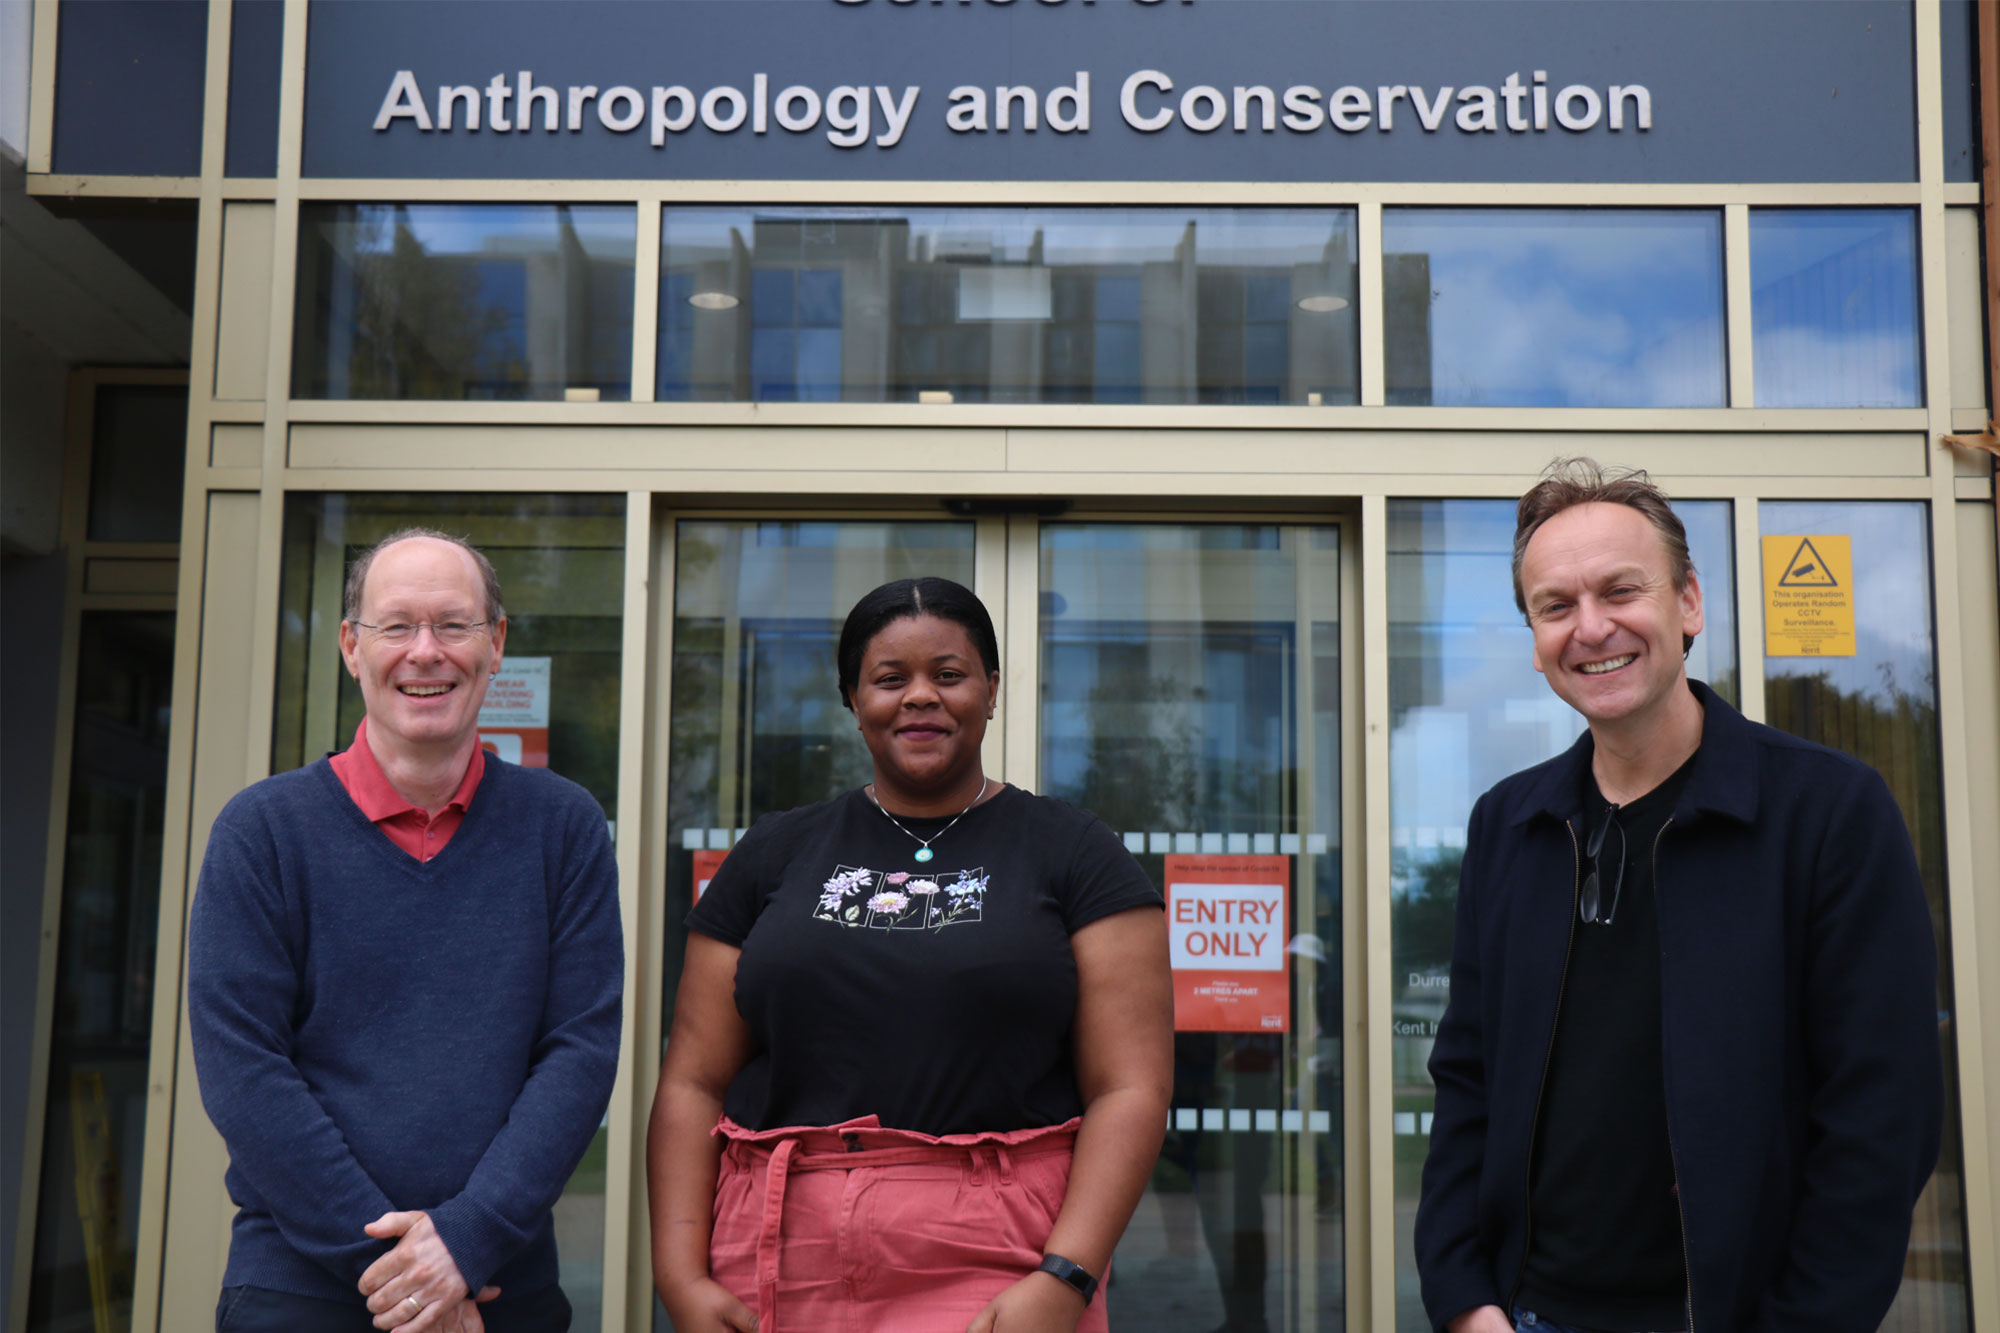 Dr Mark Hampton, Oshin Whyte and Dr Robert Fish outside the School of Anthropology and Conservation